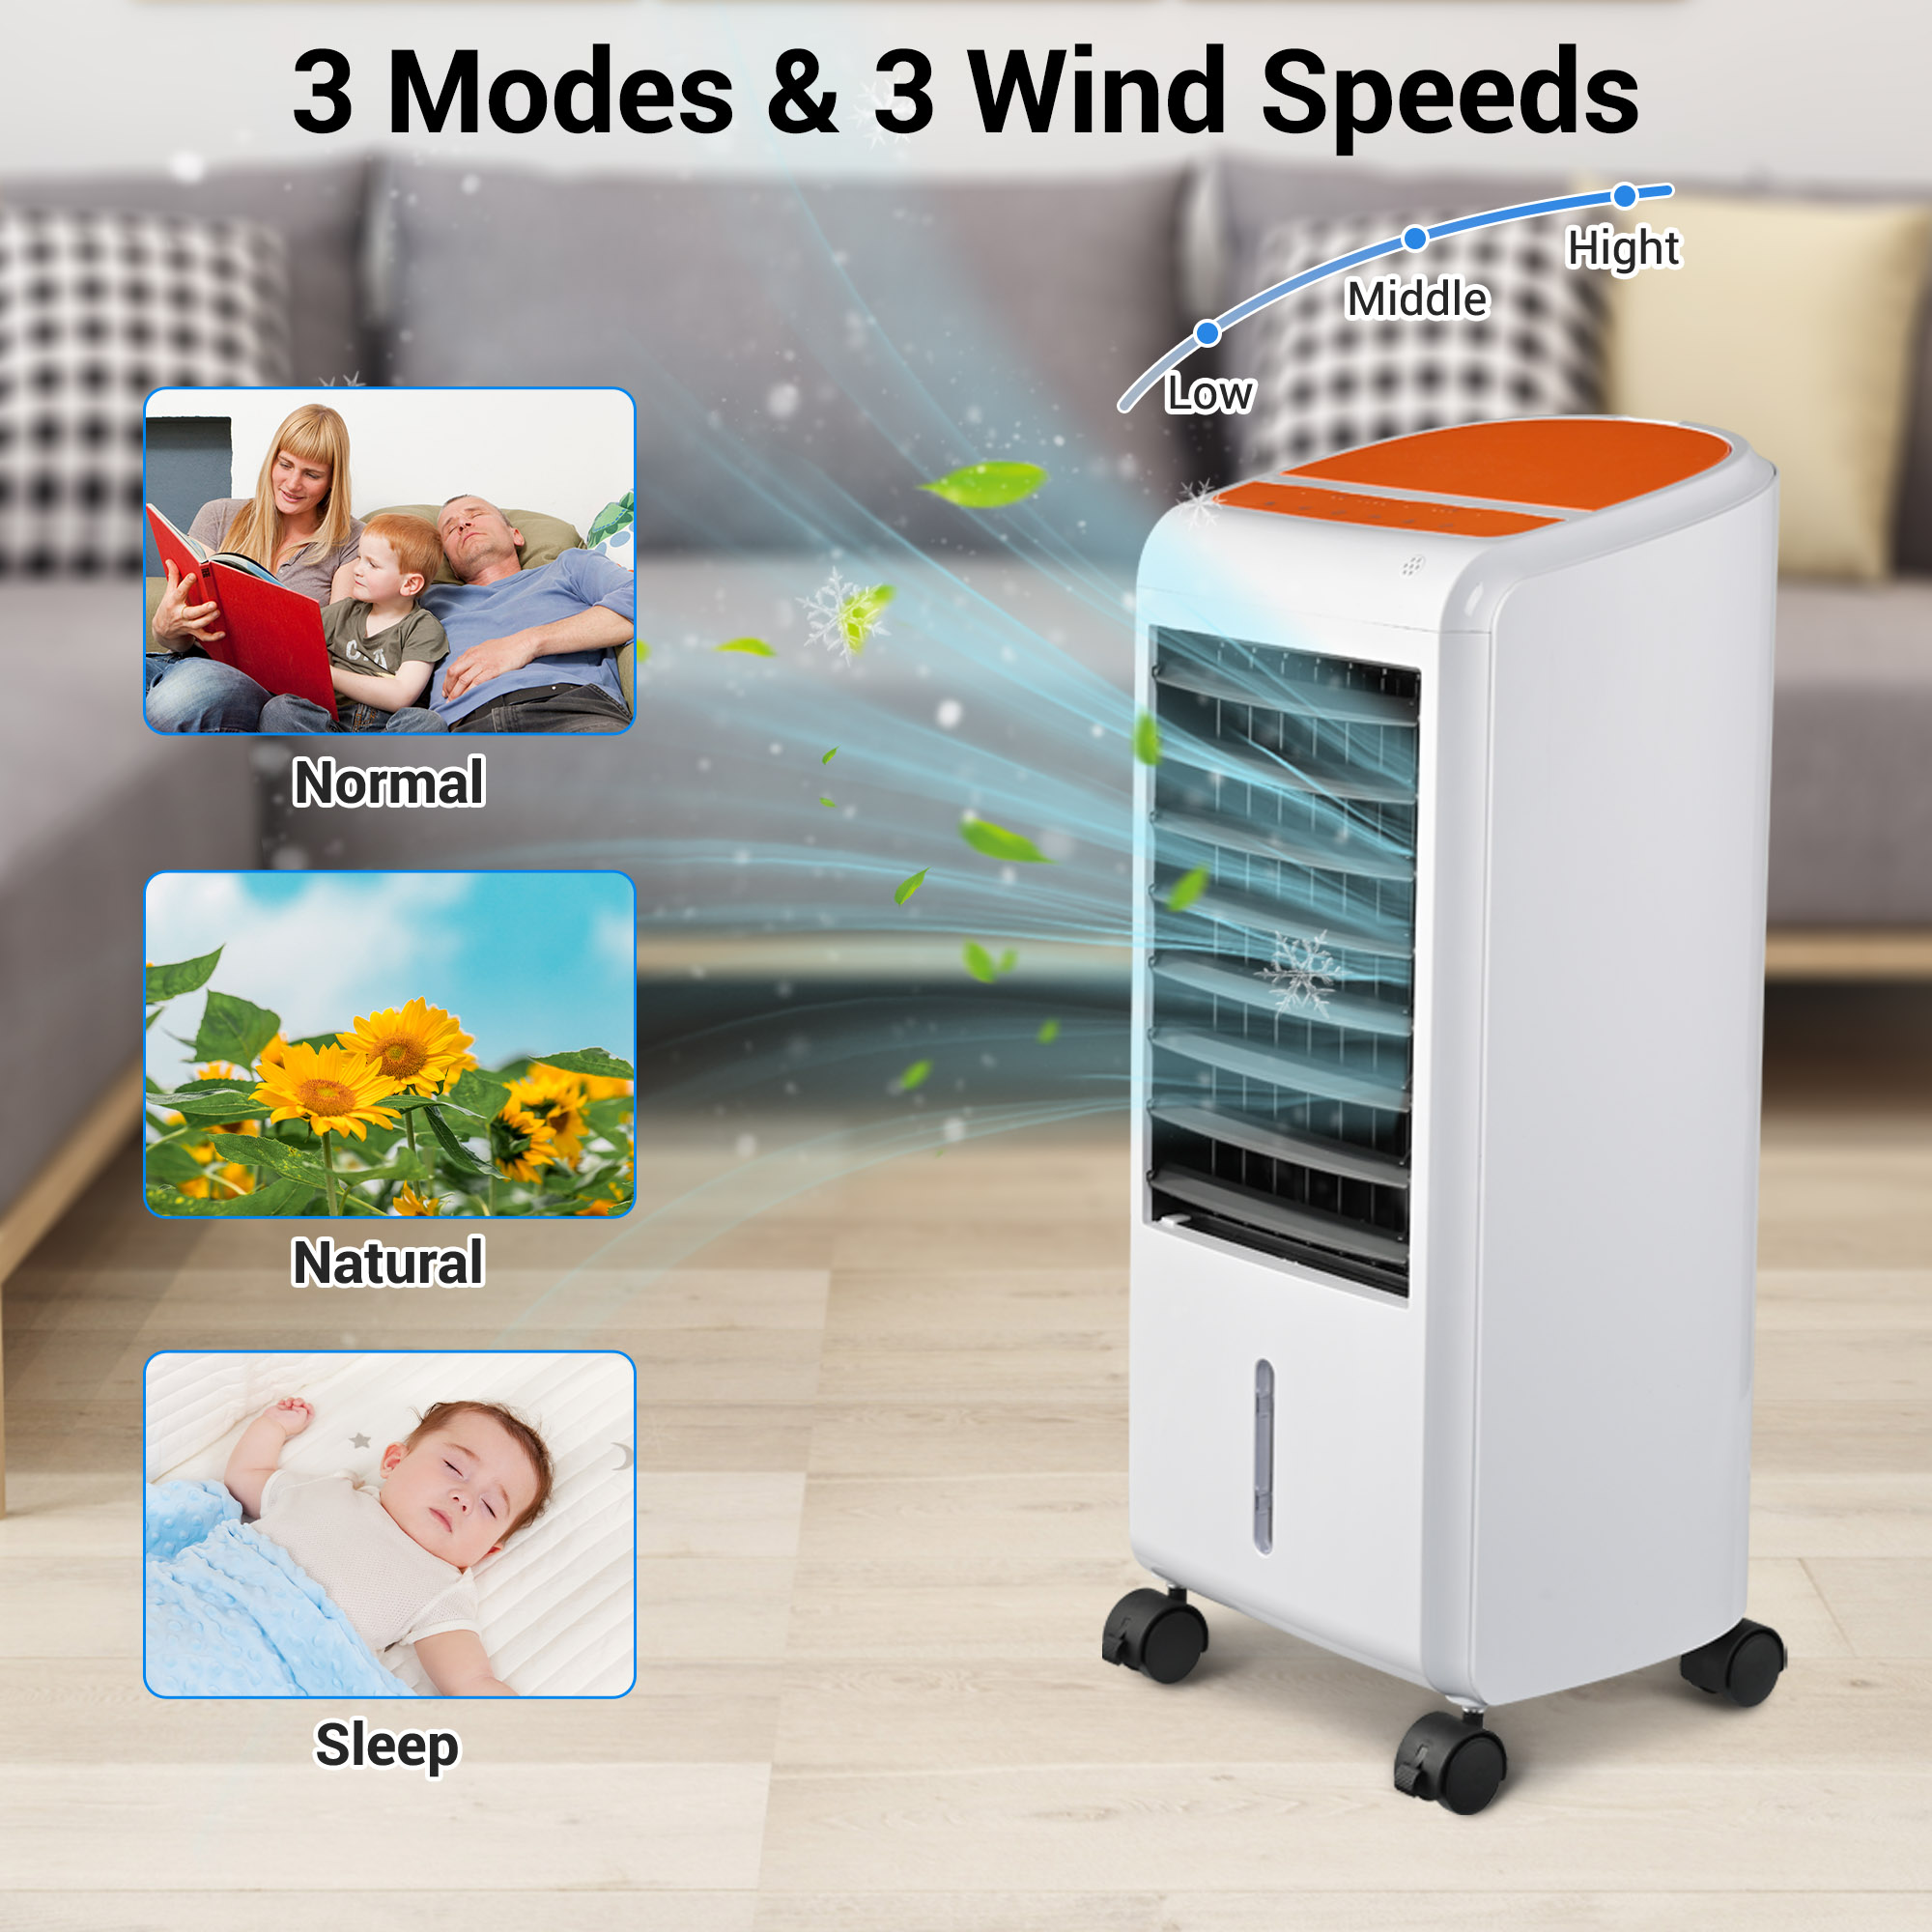 Yescom Evaporative Air Cooler 65W Portable Cooling Fan with Humidifier 3 Speeds & 12H Timer Remote Control 2 Water Tanks & 4 Ice